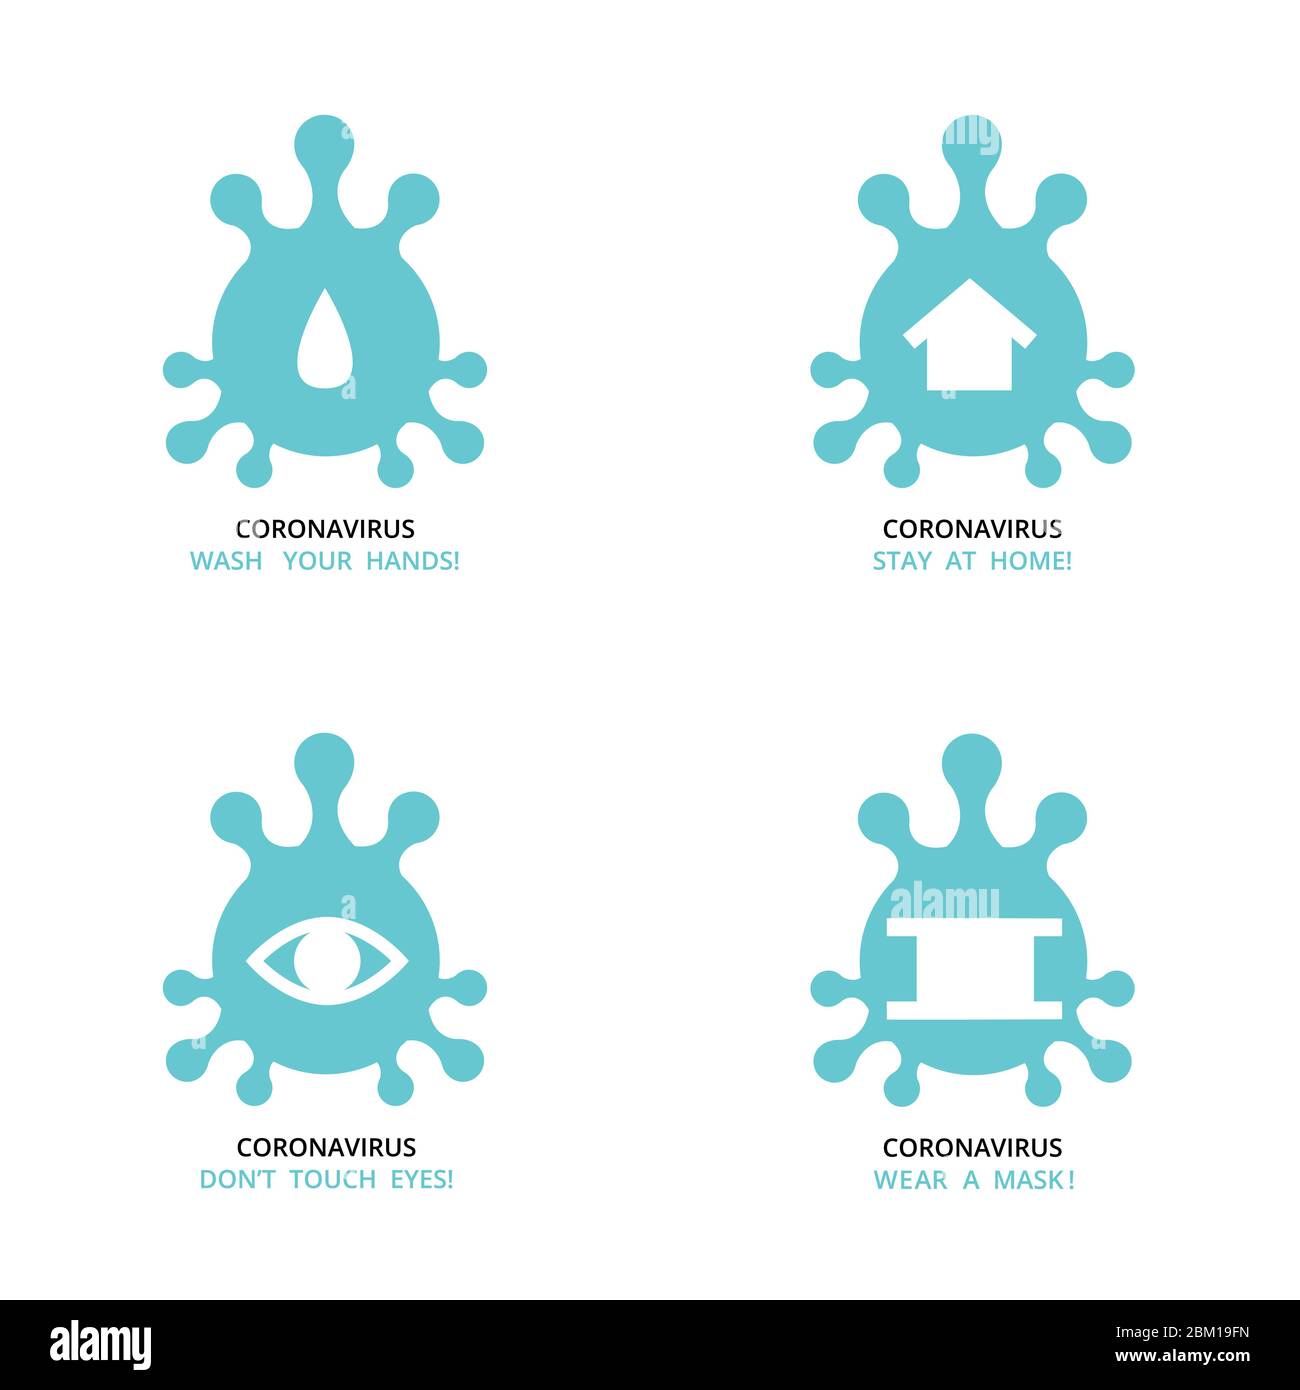 virus , bacteria , microbe icon shape set , group of schematic pictures of medicine icons with text recommendation signs for quarantine at self isolat Stock Vector